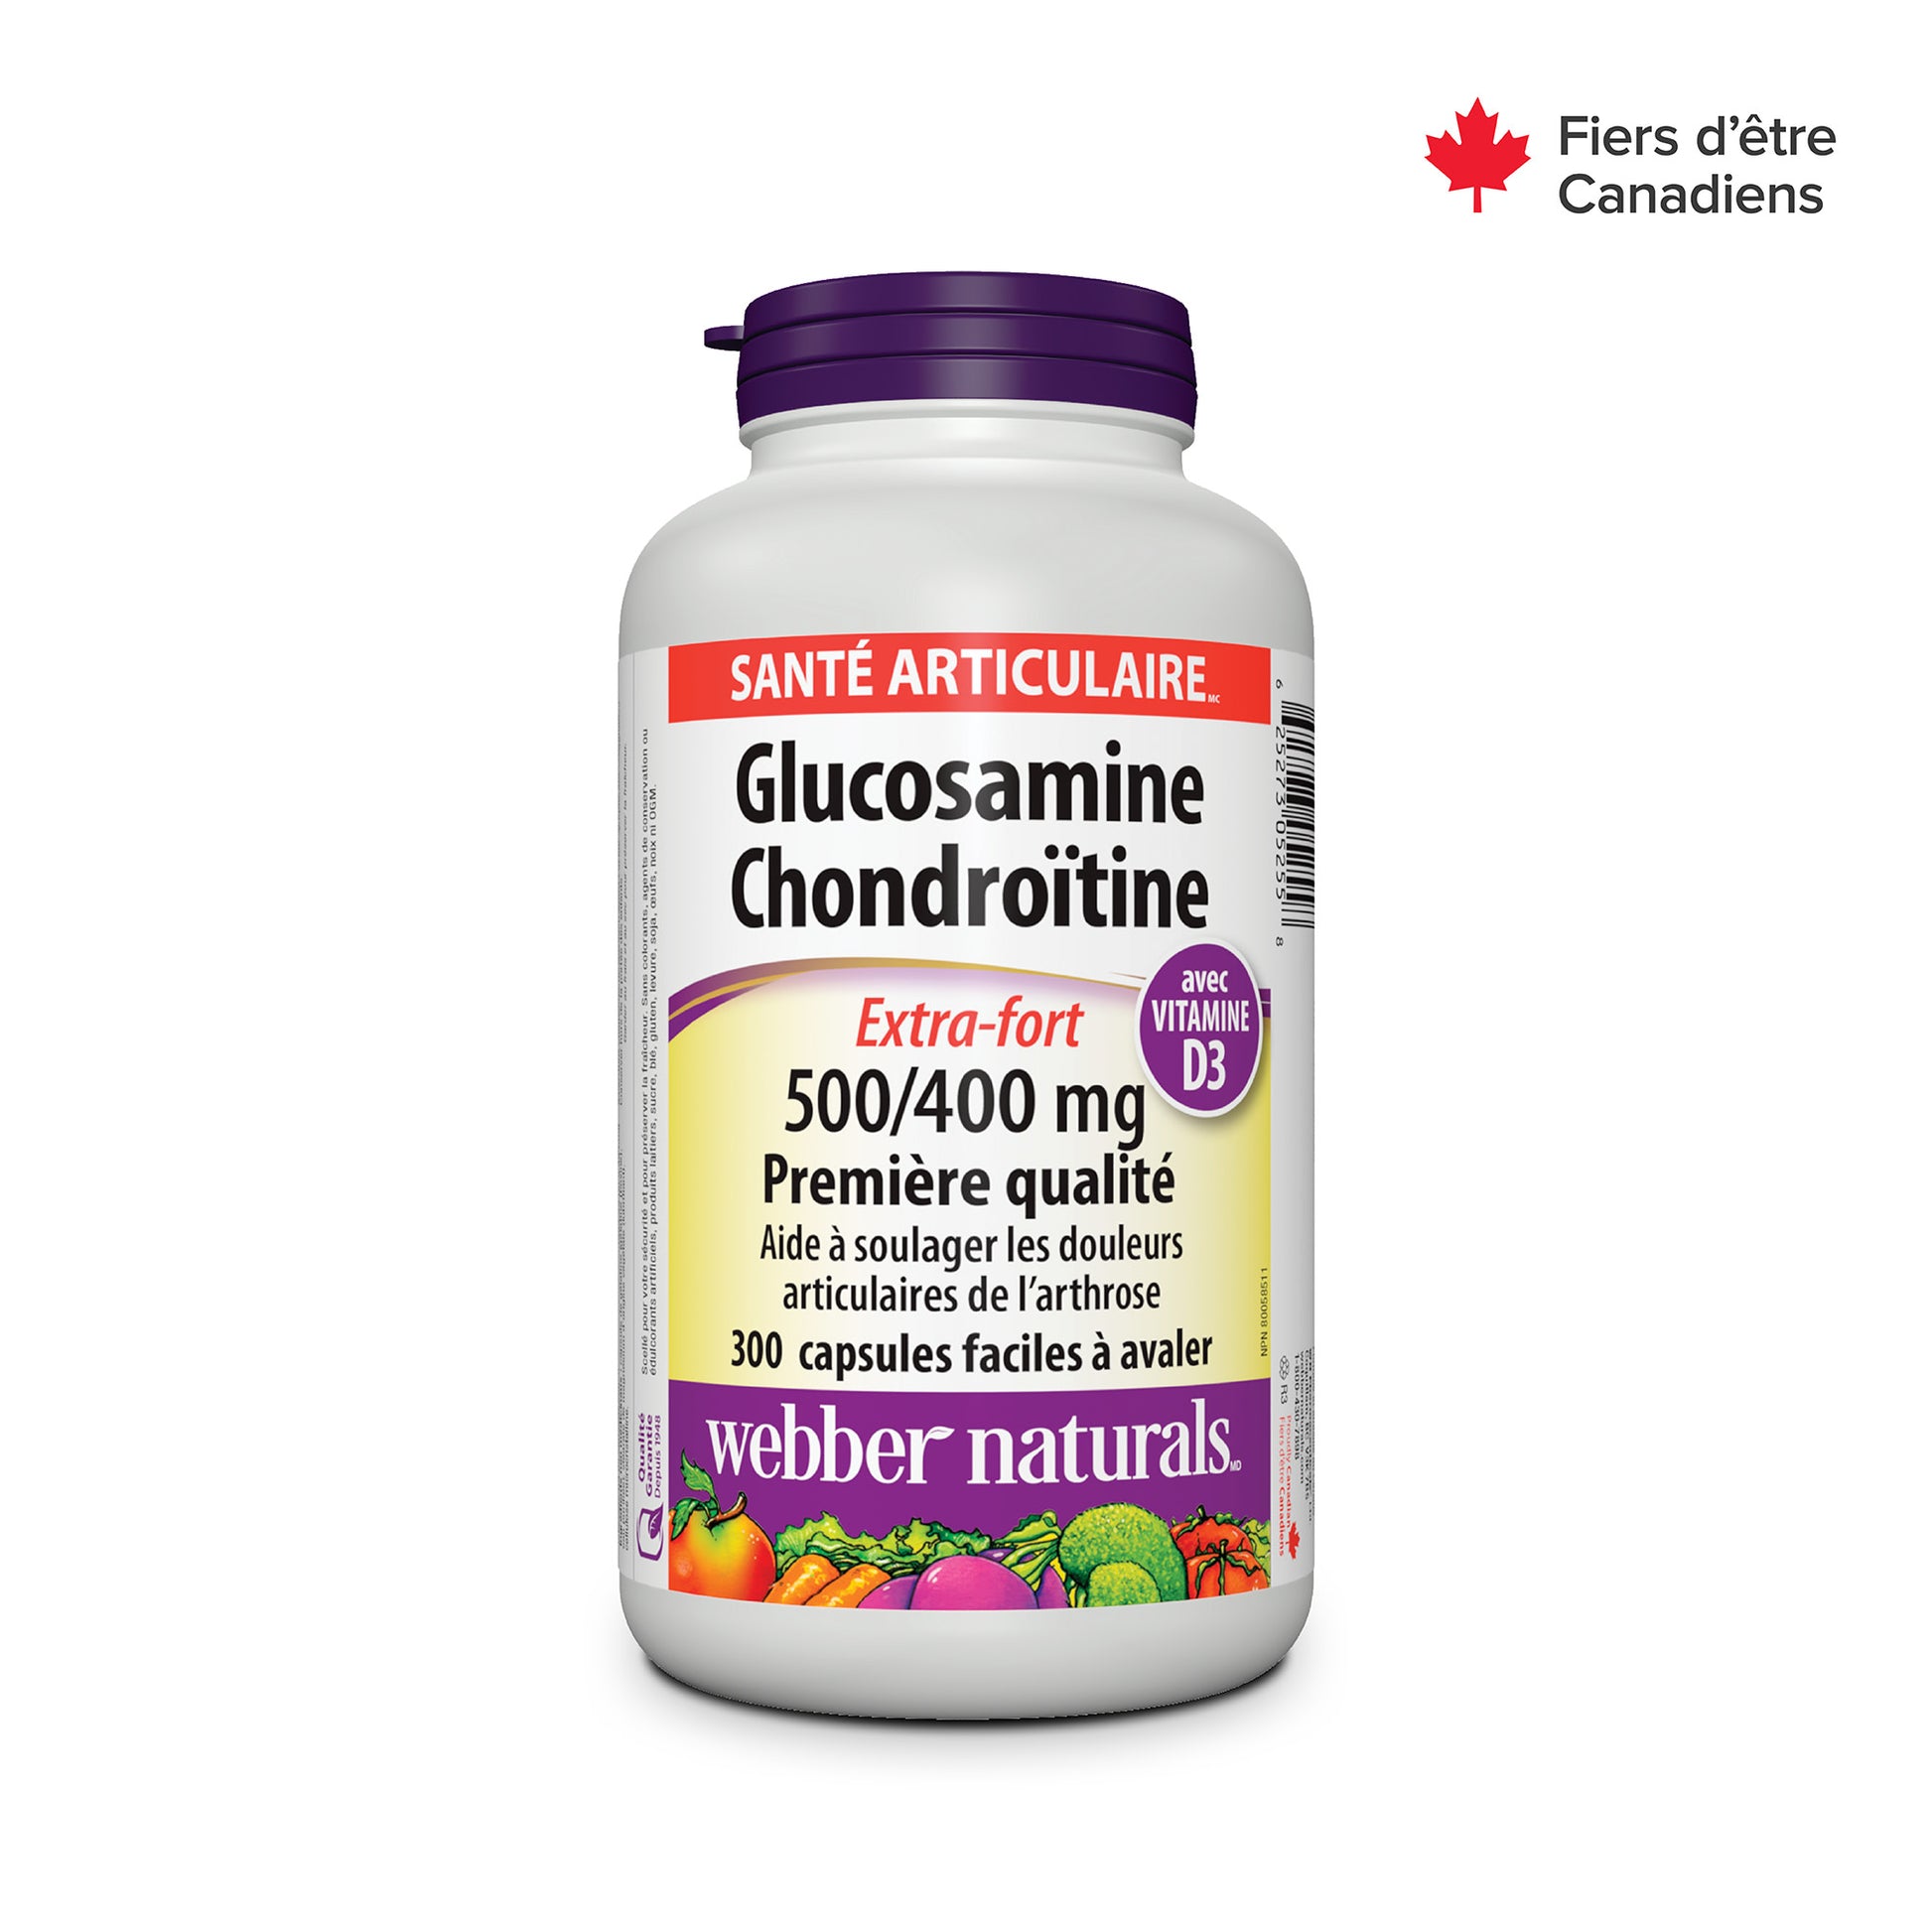 Glucosamine Chondroitin Extra Strength with Vitamin D3 500/400 mg Caplets for Webber Naturals|v|hi-res|WN5255